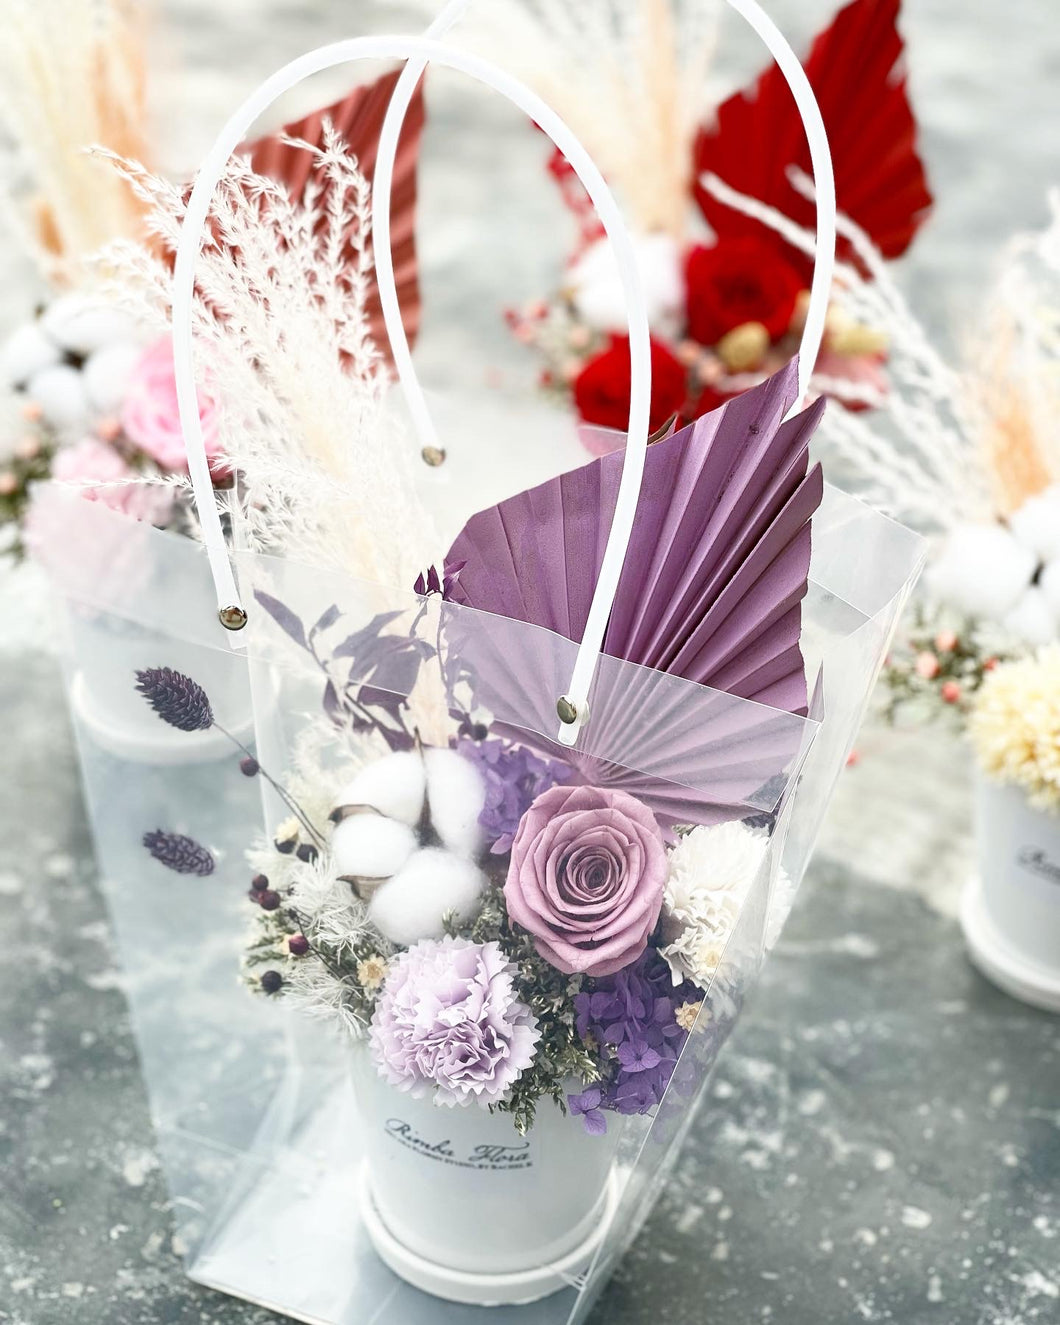 Preserved Flower Vase To You (Preserved Flowers Purple Roses, Carnation & Assorted Dried Flowers Collection)